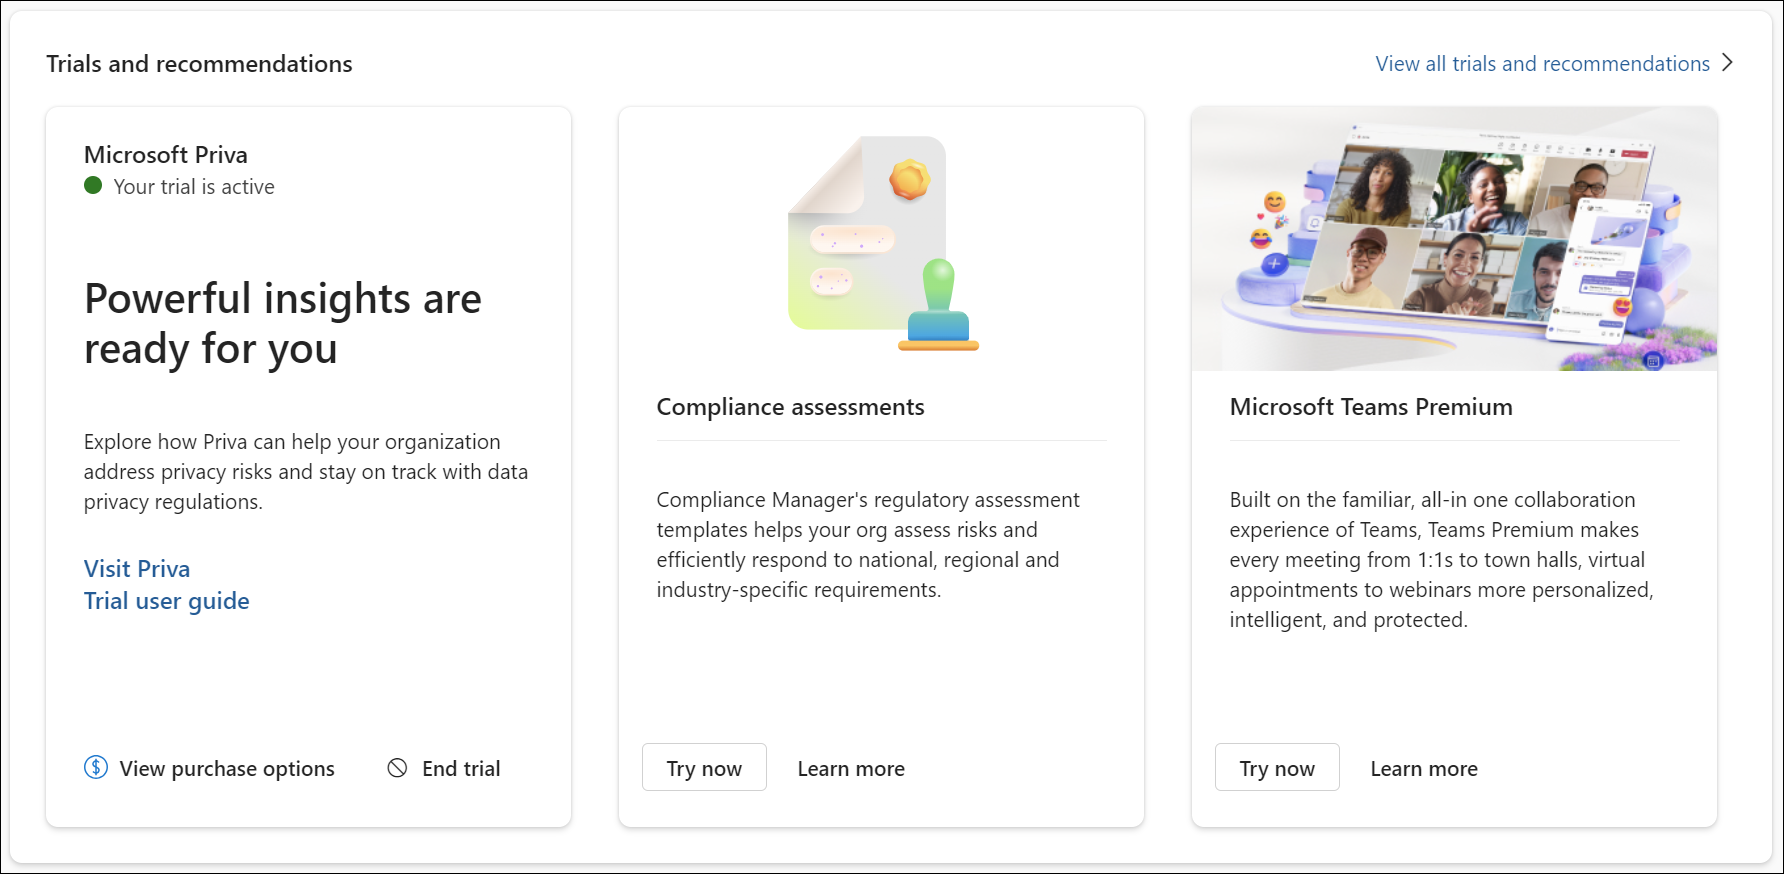 Microsoft Purview portal trials and recommendations card.